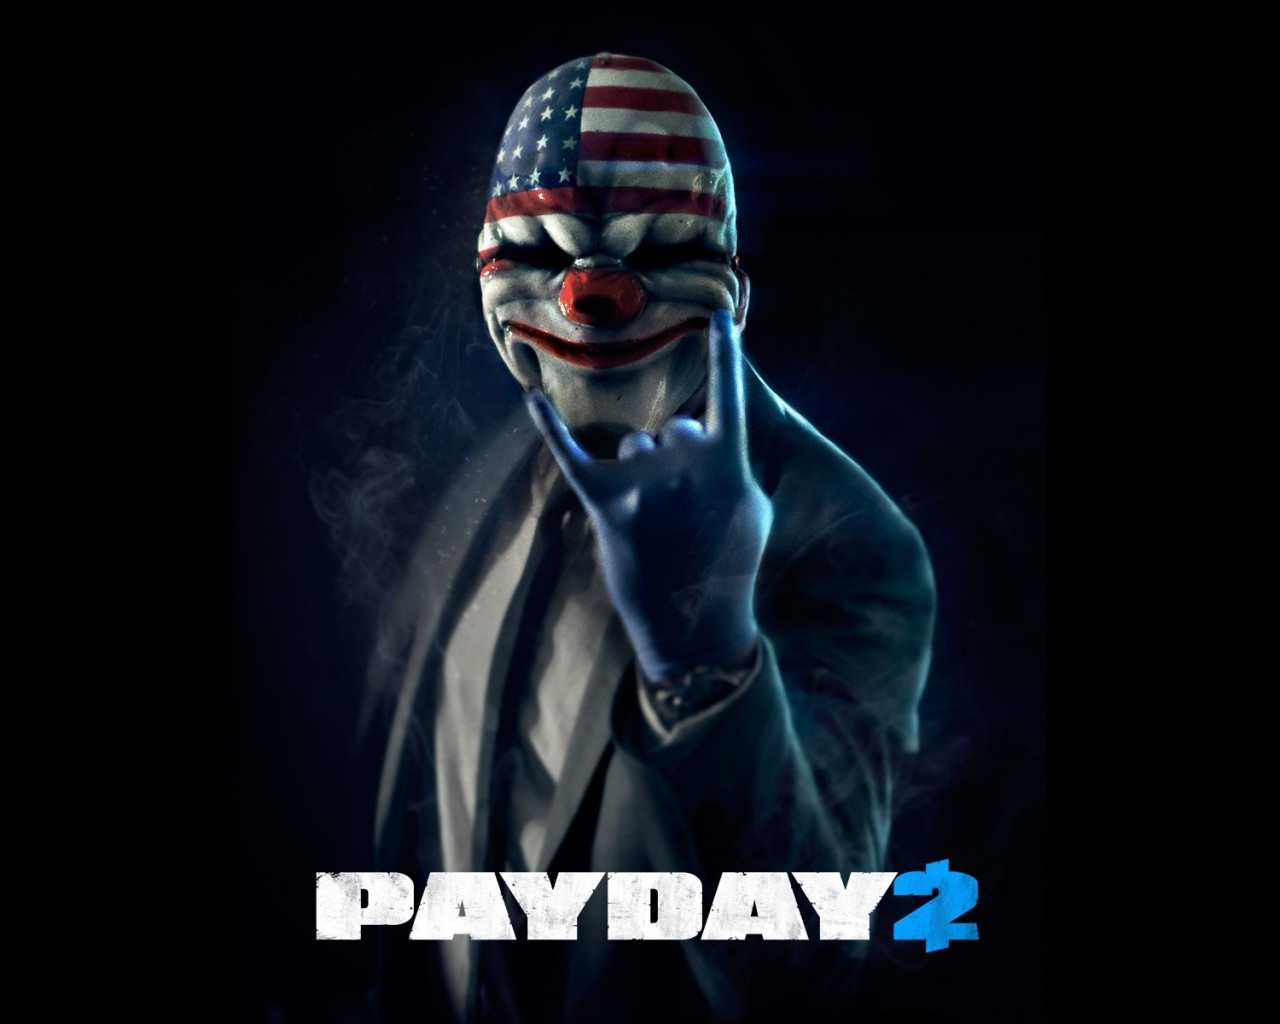 PAYDAY 2 Poster for 1280 x 1024 resolution